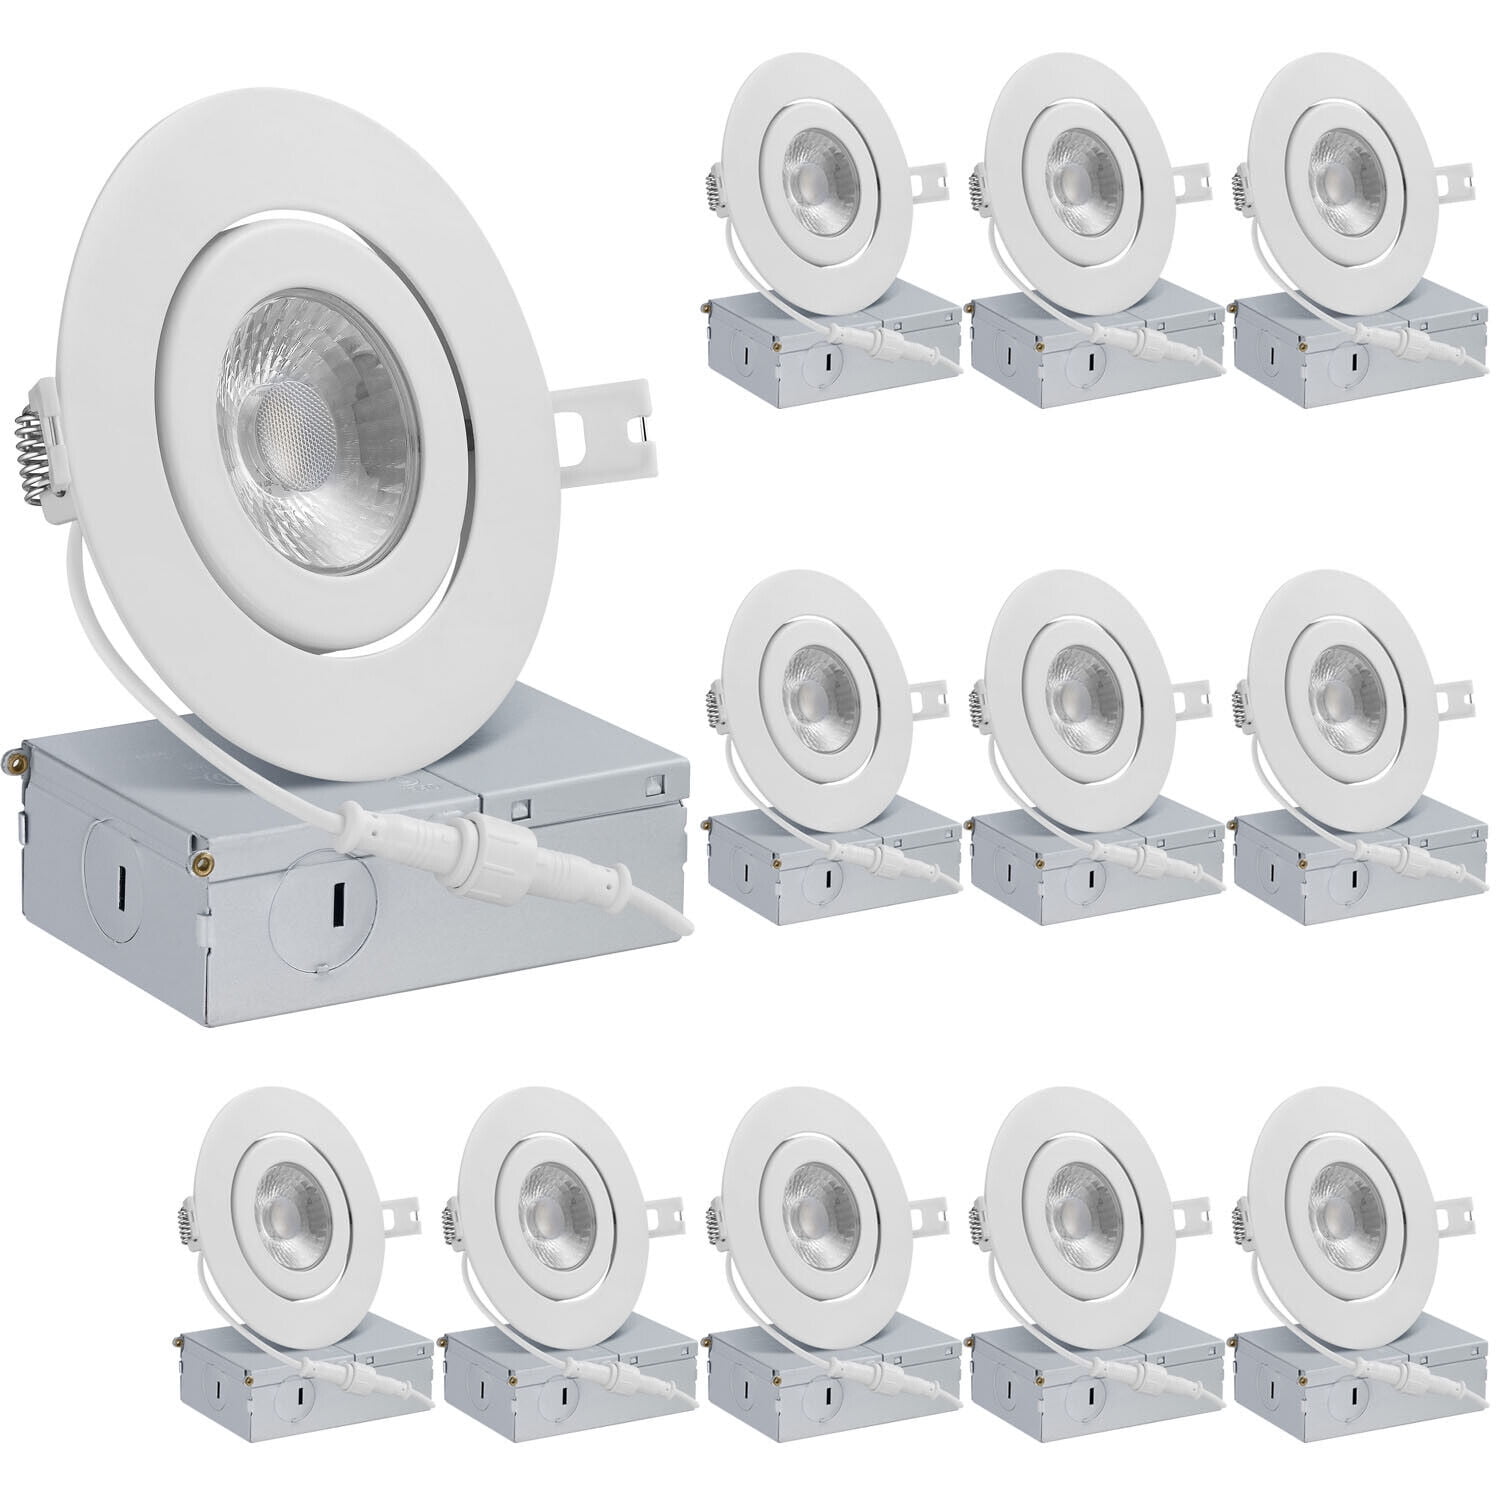 QPLUS Inch Ultra-Thin Adjustable Eyeball Gimbal LED Recessed Lighting  with Junction Box/Canless Downlight, 10 Watts, 750lm, Dimmable, Energy Star  and ETL Listed (4000K Neutal, 12 Pack)